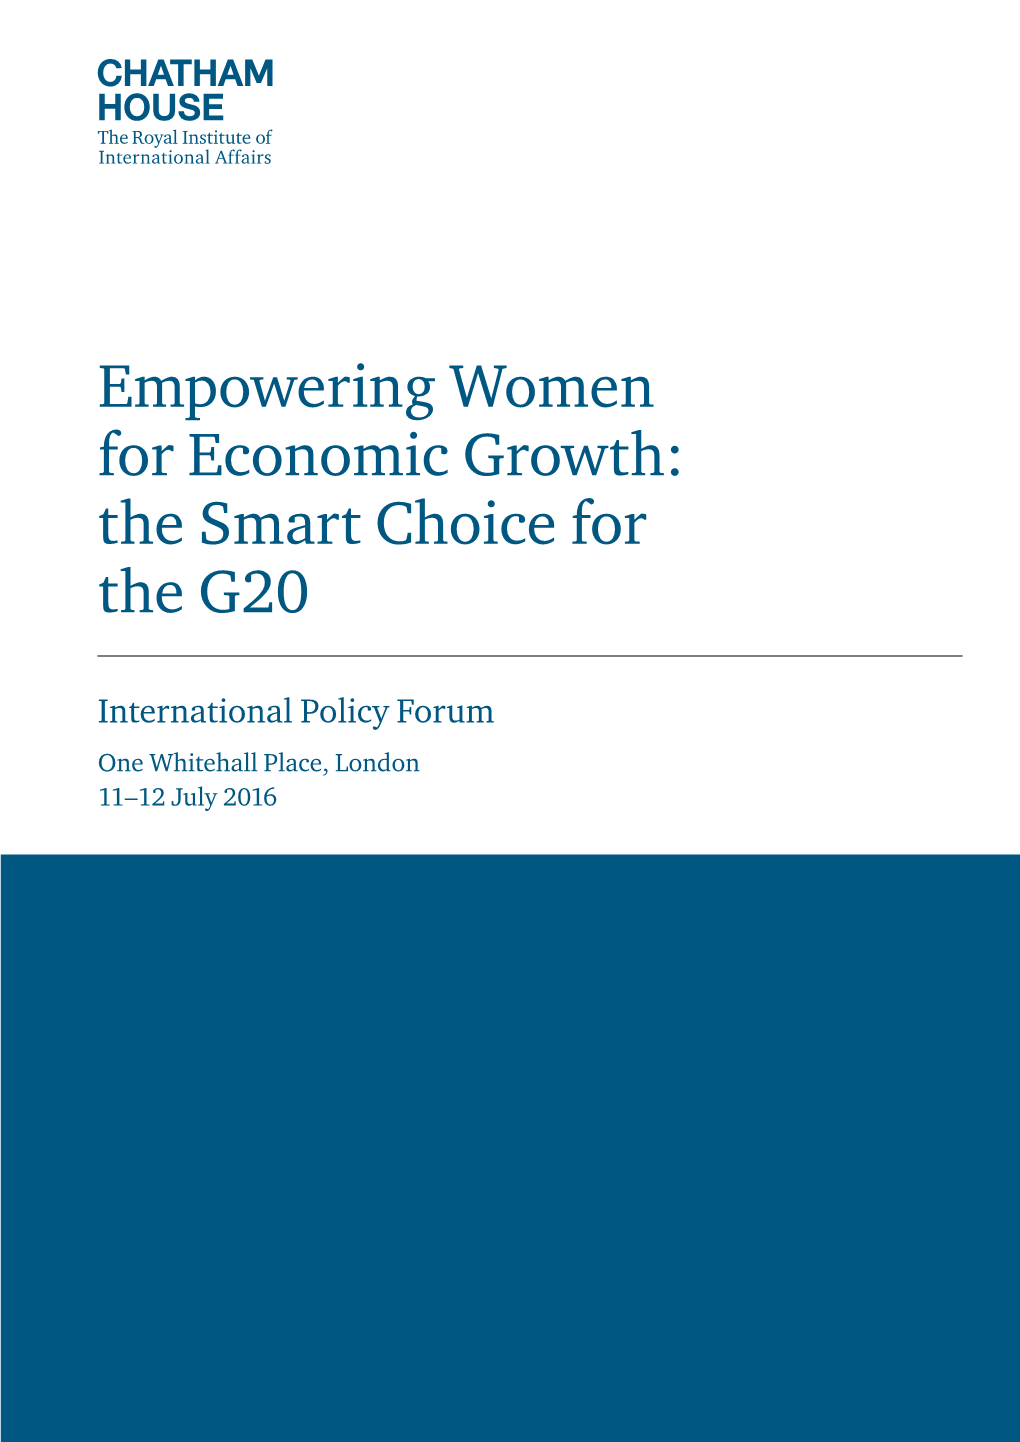 Empowering Women for Economic Growth: the Smart Choice for the G20